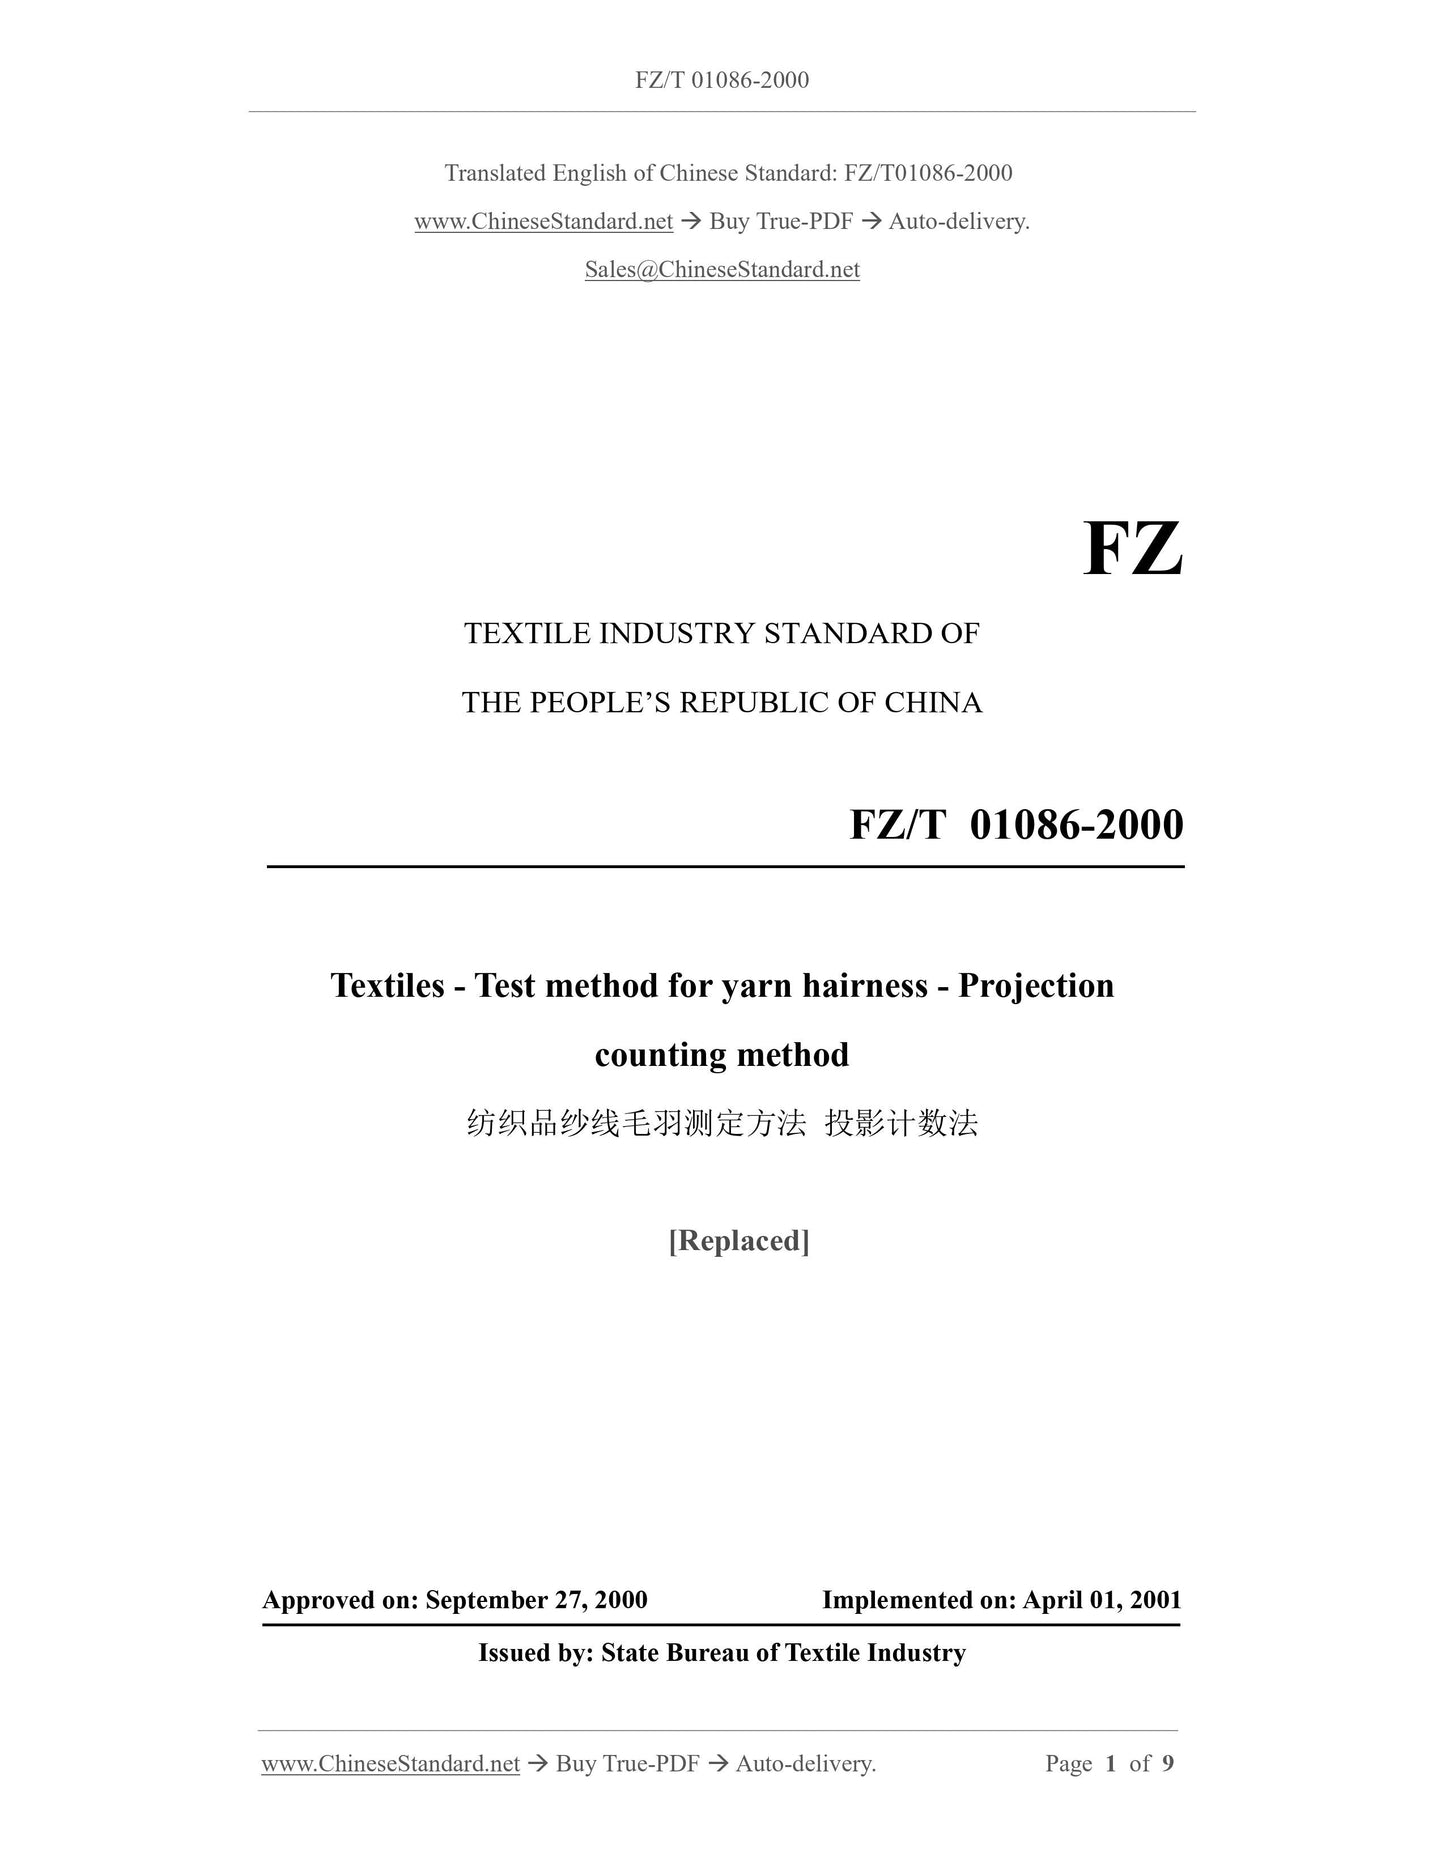 FZ/T 01086-2000 Page 1